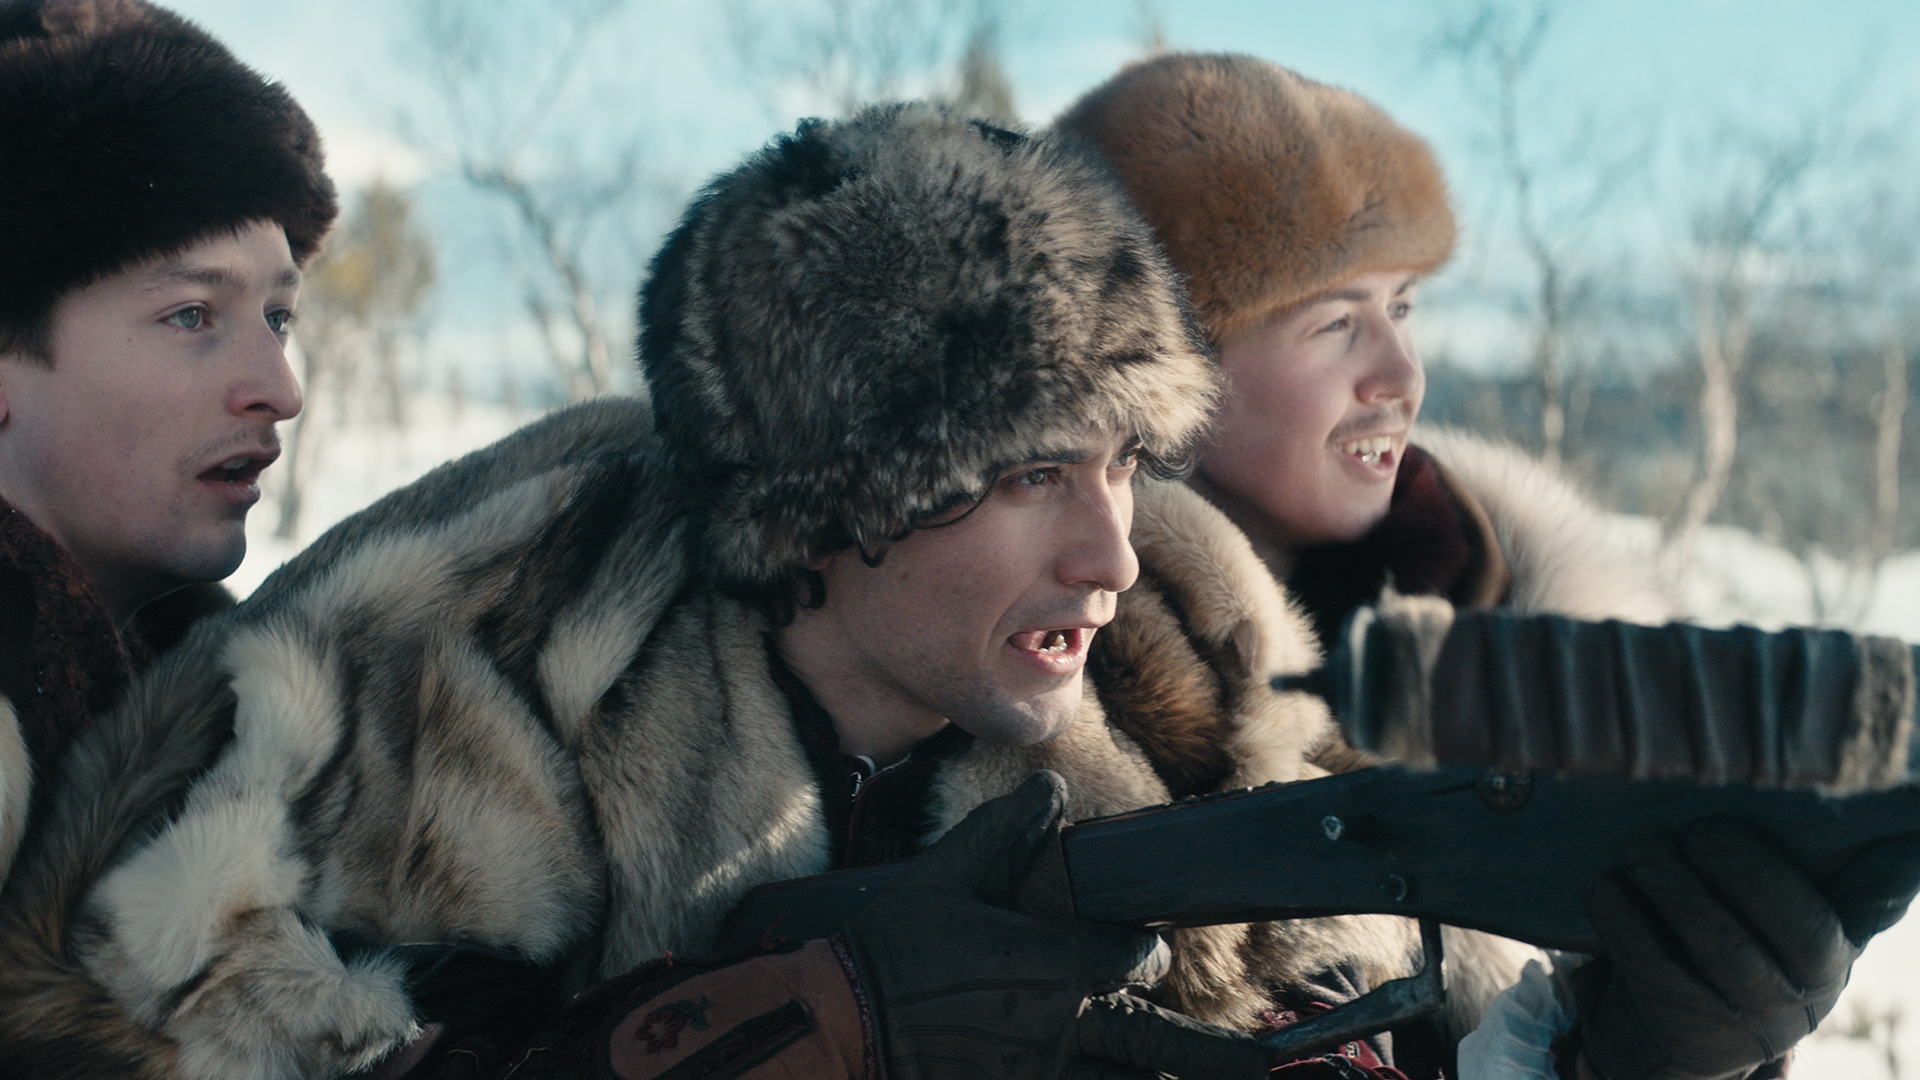 Three men wearing fur hats and coats hunting out in the snow from the movie Tre nøtter til Askepott.